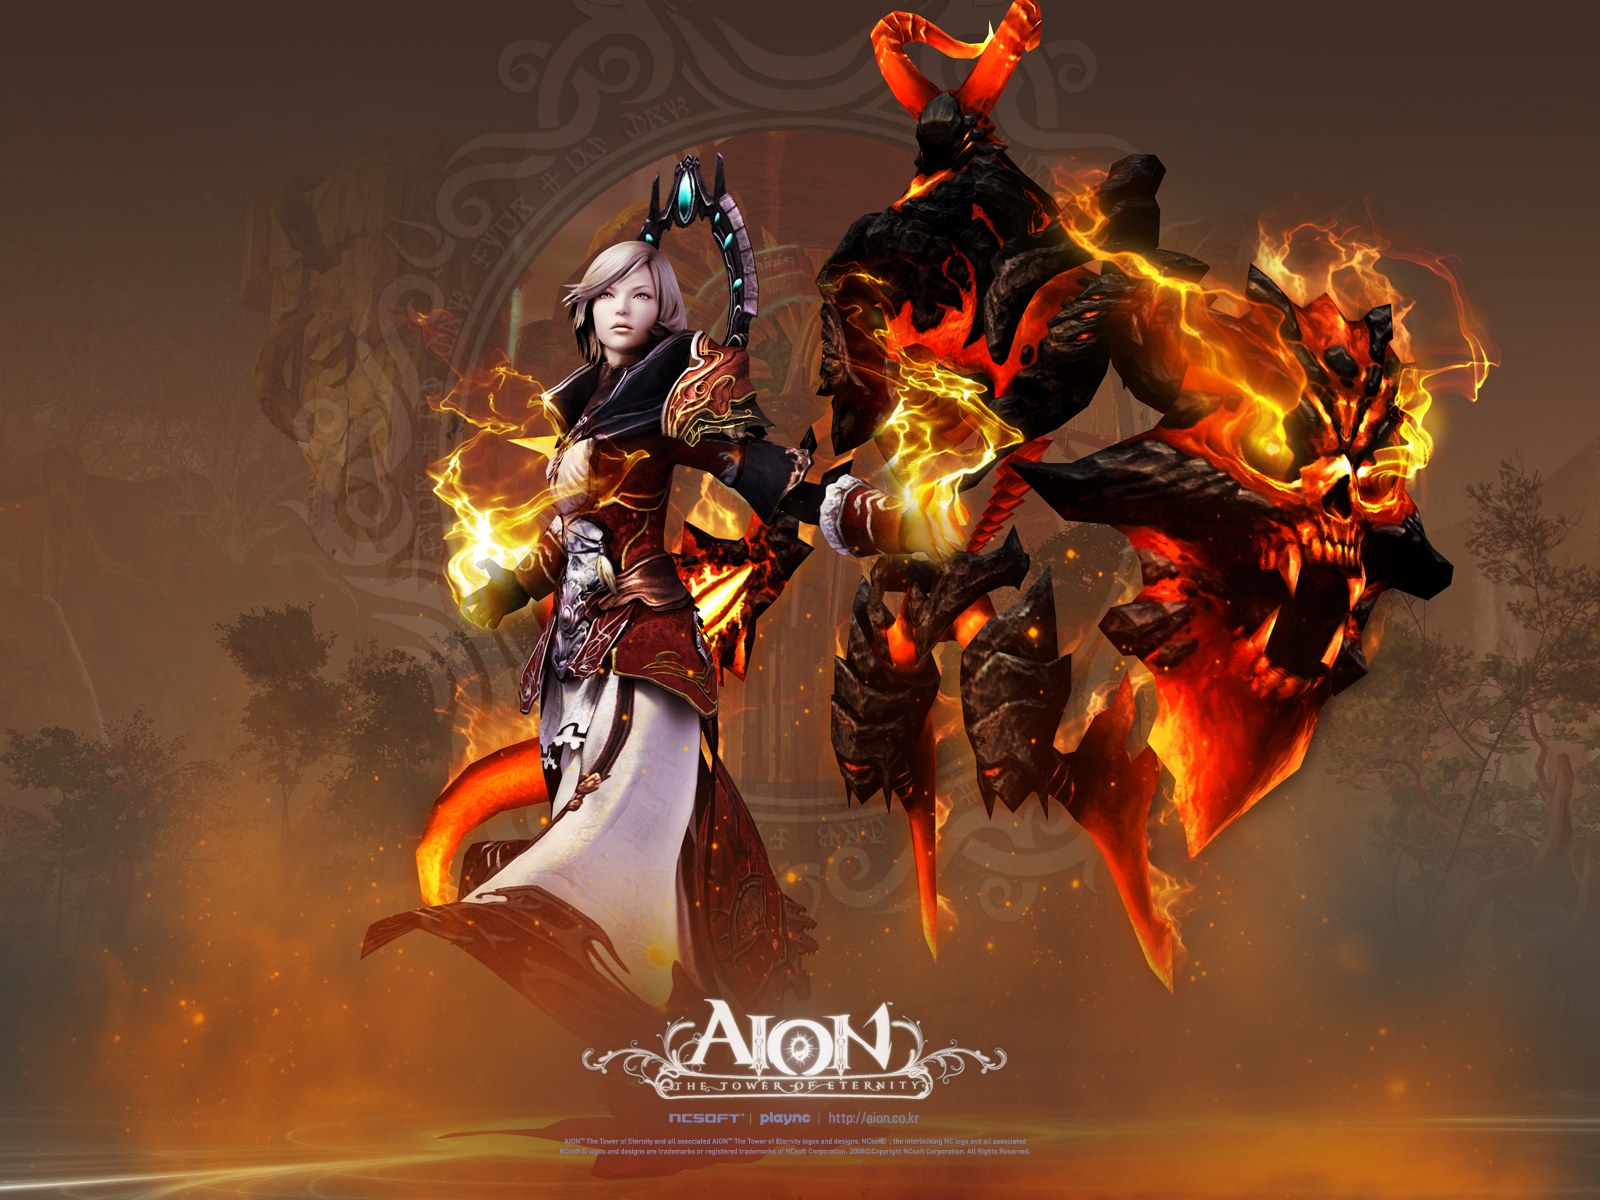 aion, video game download HD wallpaper